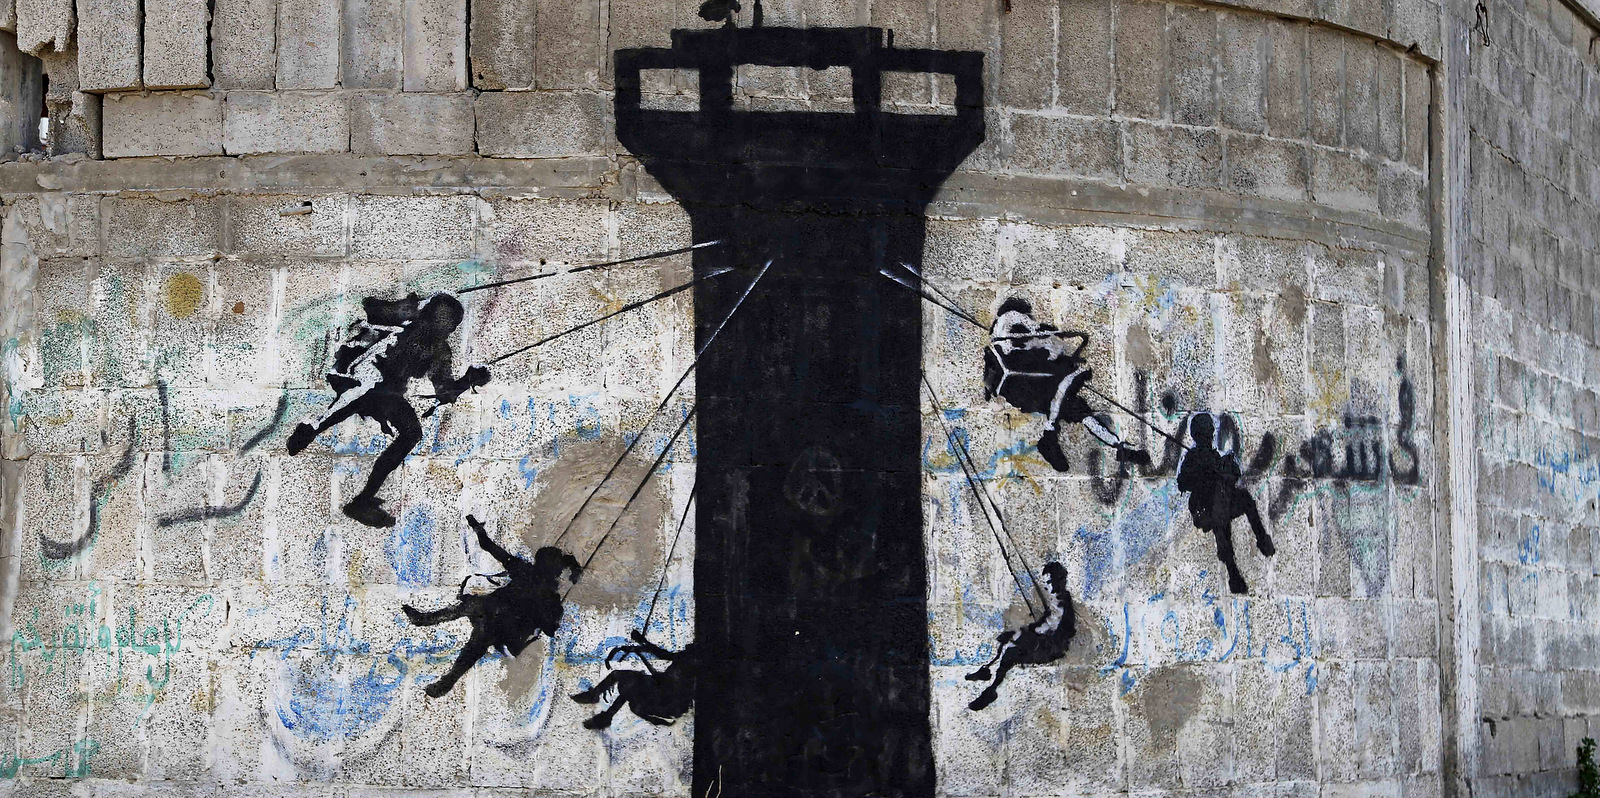 A mural of children using an Israeli army watch tower as a swing ride, presumably painted by British street graffiti artist Banksy, is seen on a wall at main wall at the main road in Beit Lahiya, in the northern Gaza Strip, Friday, Feb. 27, 2015. (AP/Adel Hana)